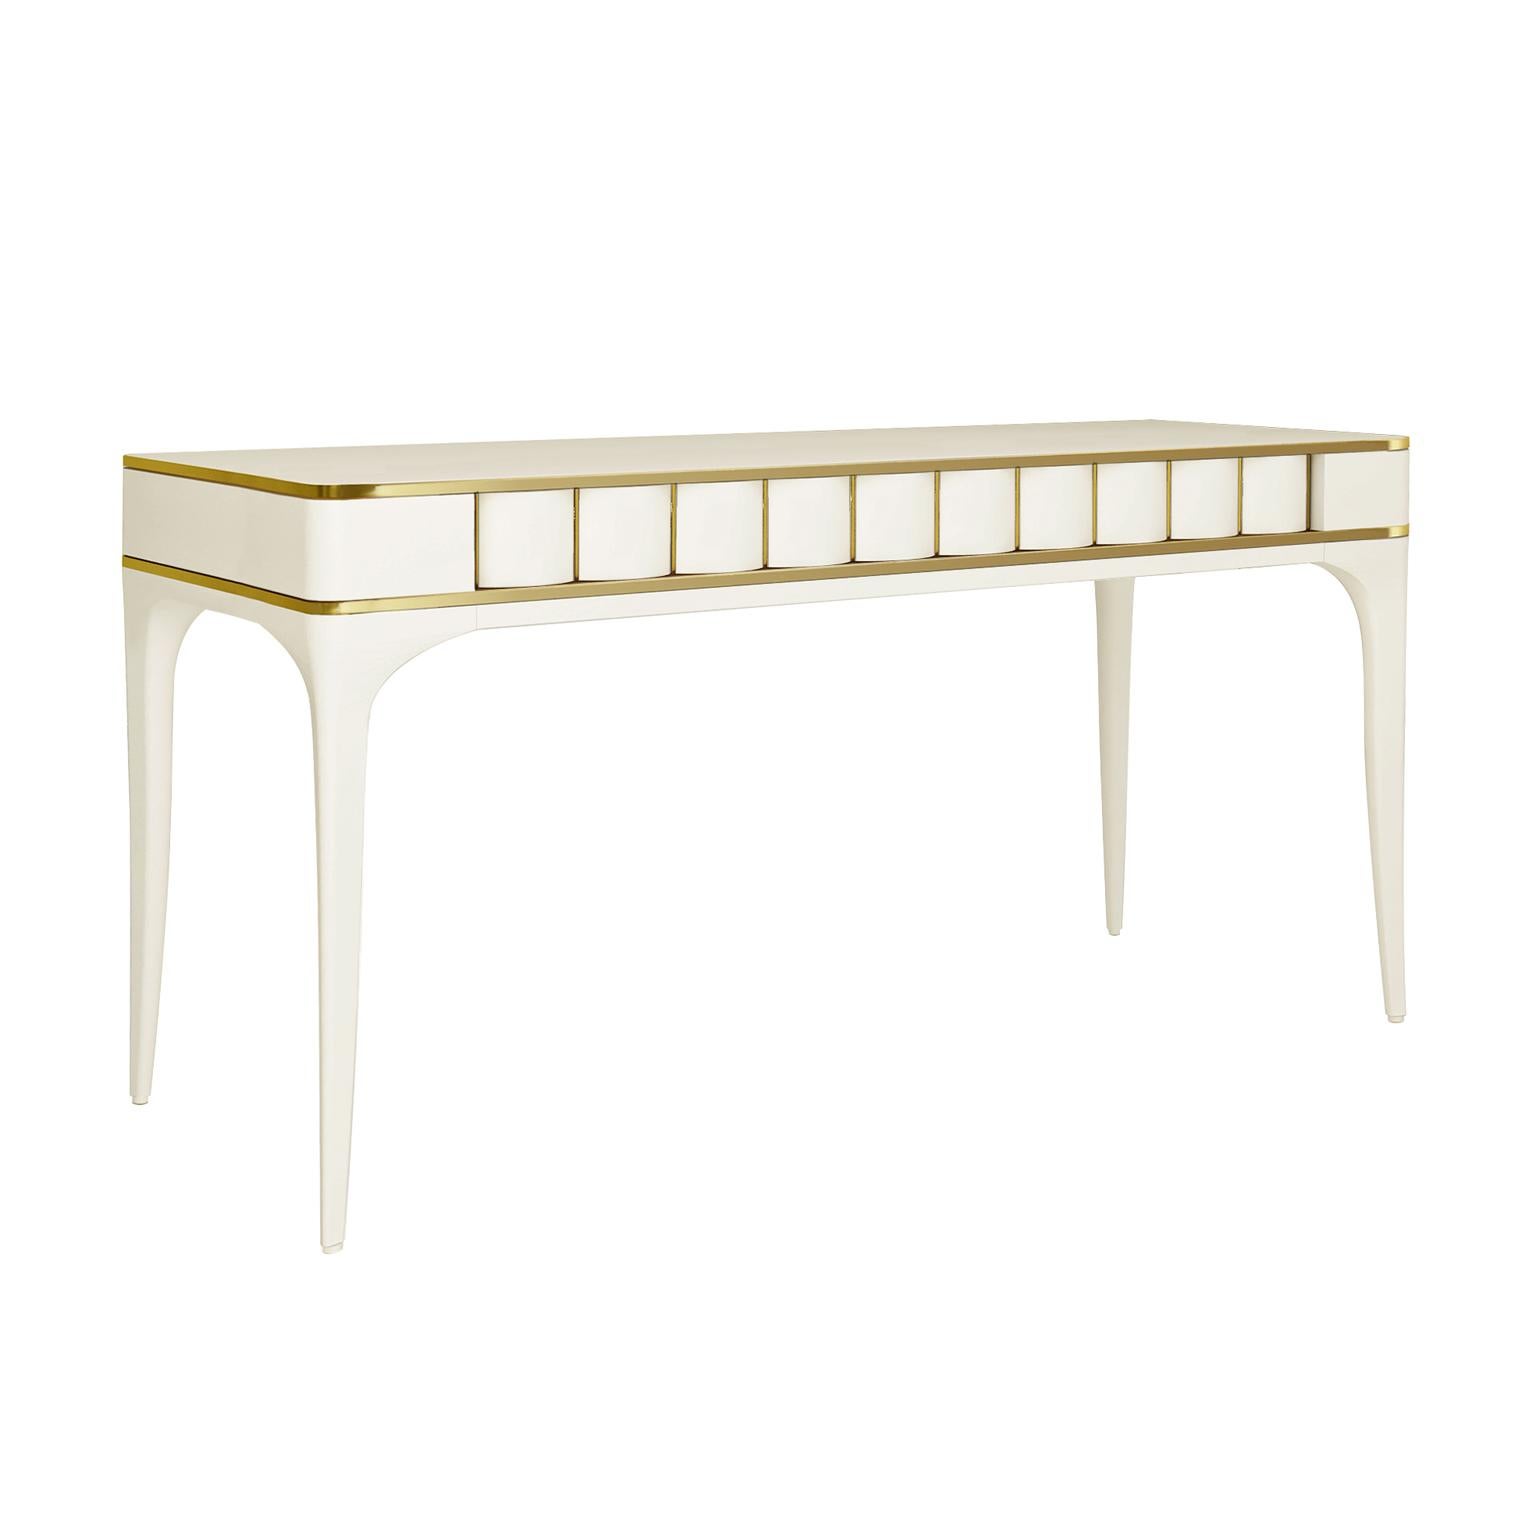 Designed by IC and beautifully crafted by Italian artisans, the Duilio desk features a ribbed drawer and stylish legs. The brass, or powder coated metal, details and stunning design will bring elegance and sophistication to any space of your